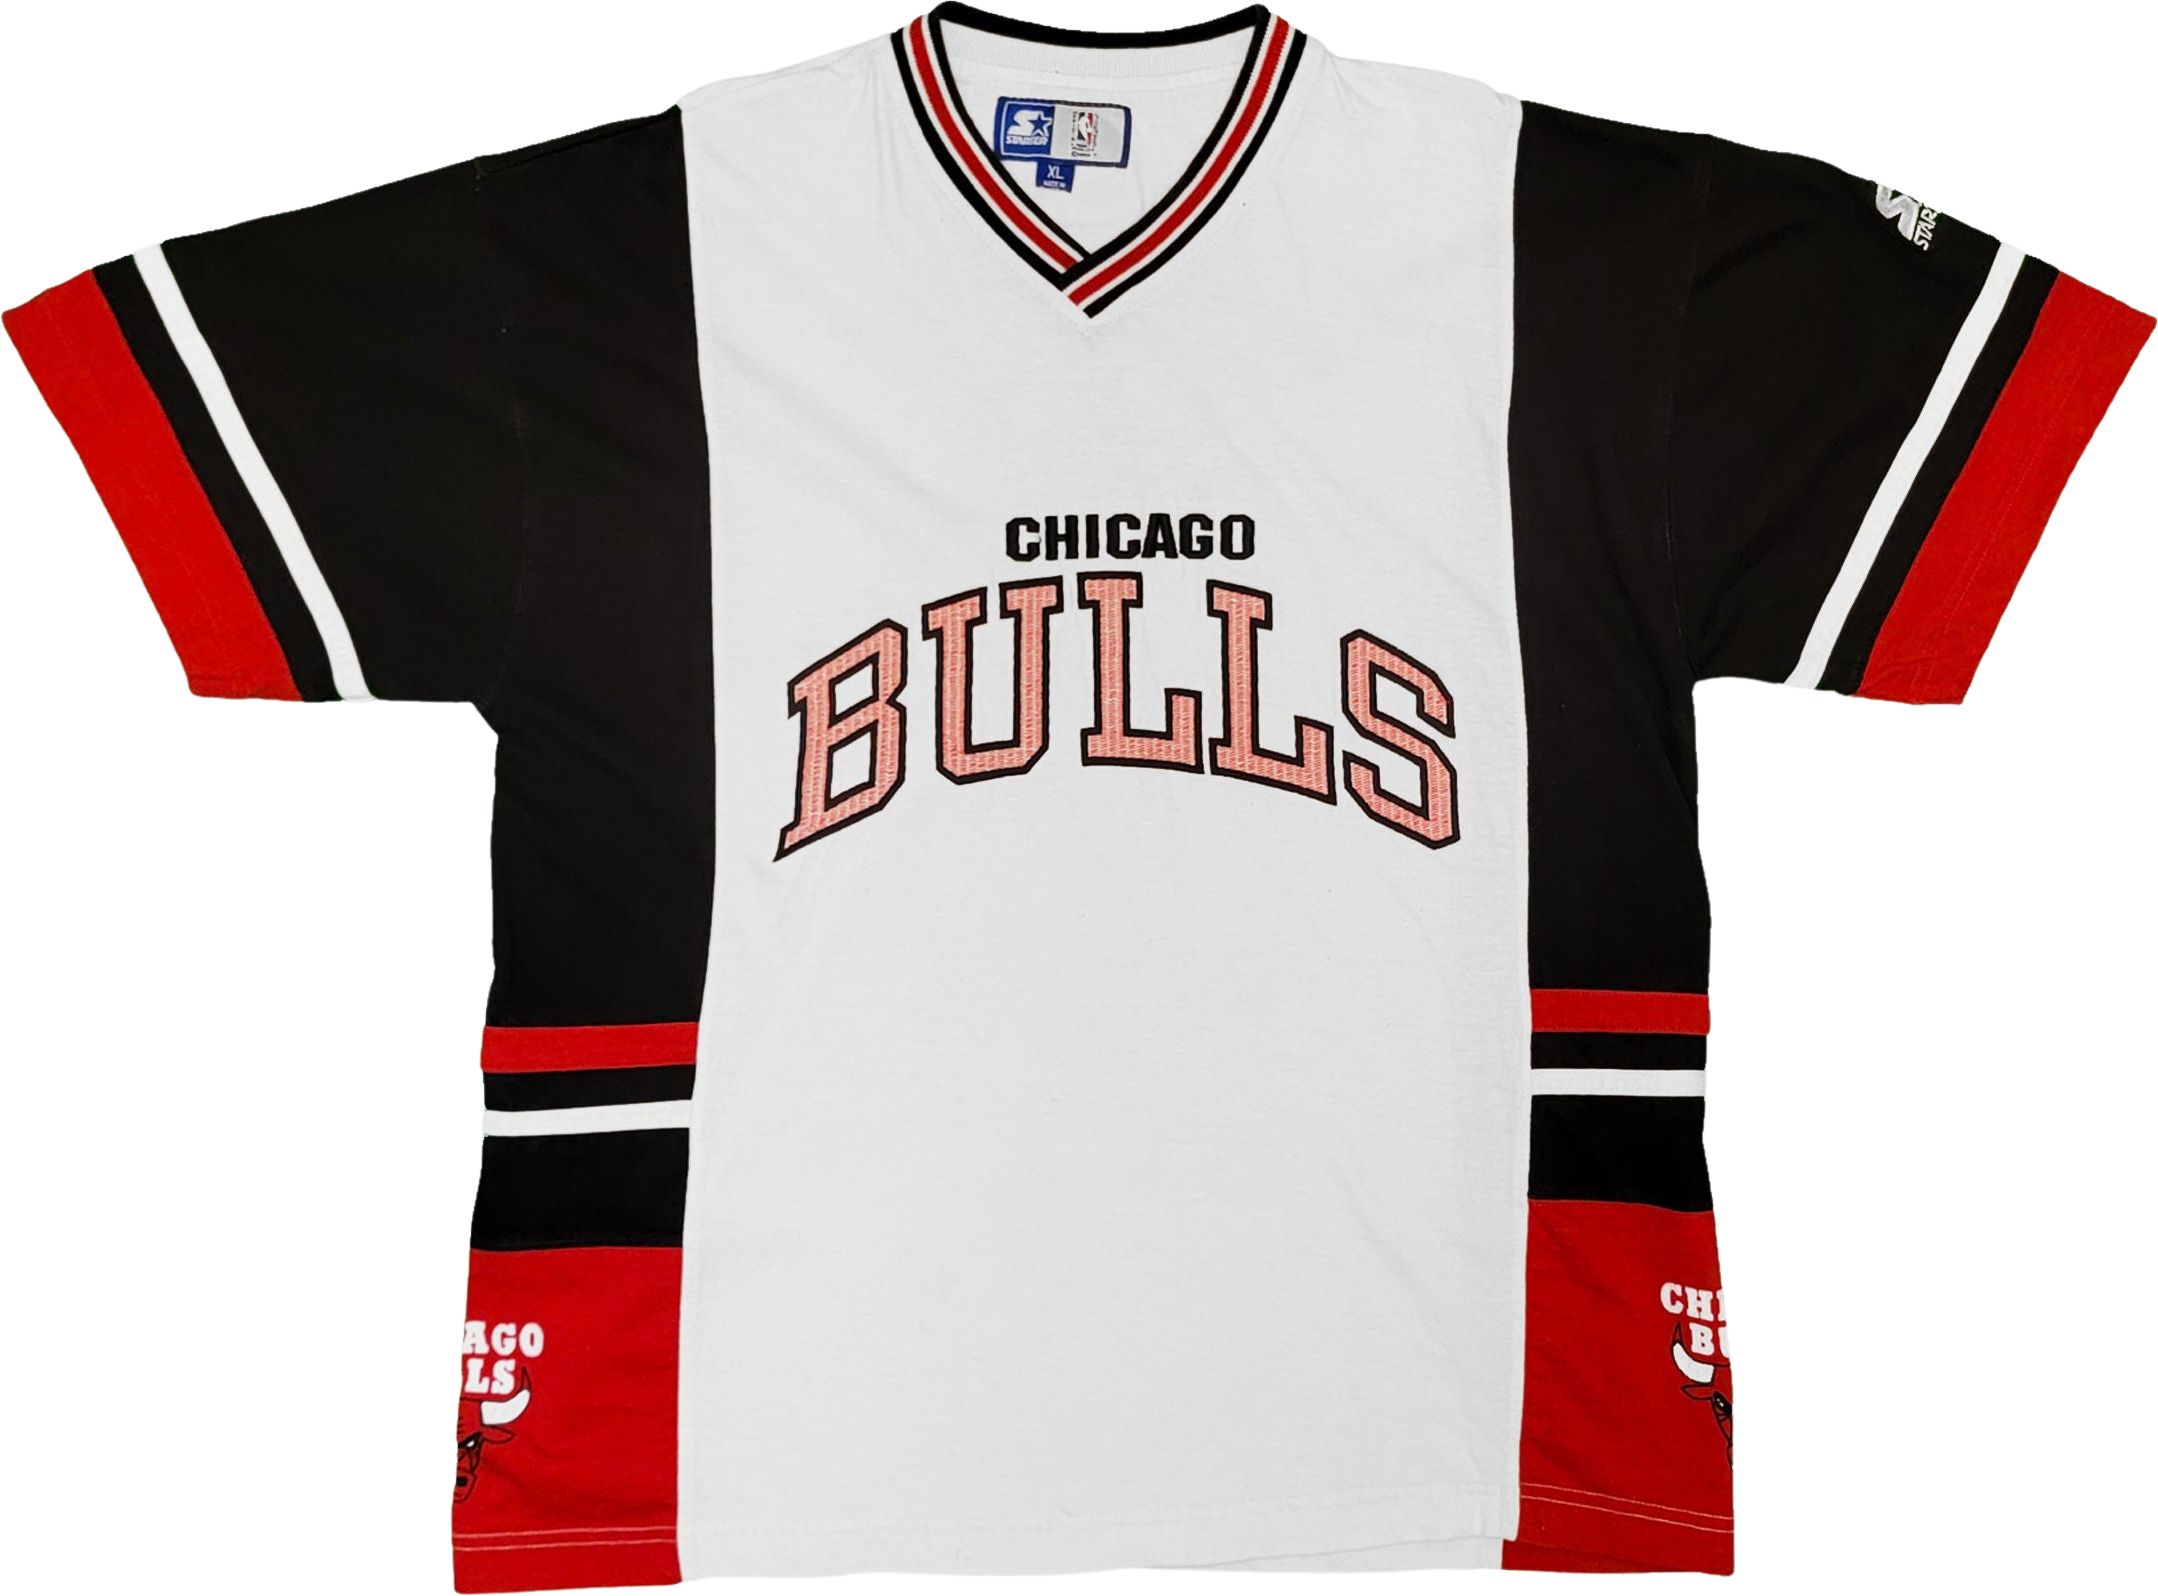 CHICAGO BLACKHAWKS VINTAGE 1990'S STARTER AUTHENTIC JERSEY YOUTH LARGE / XL